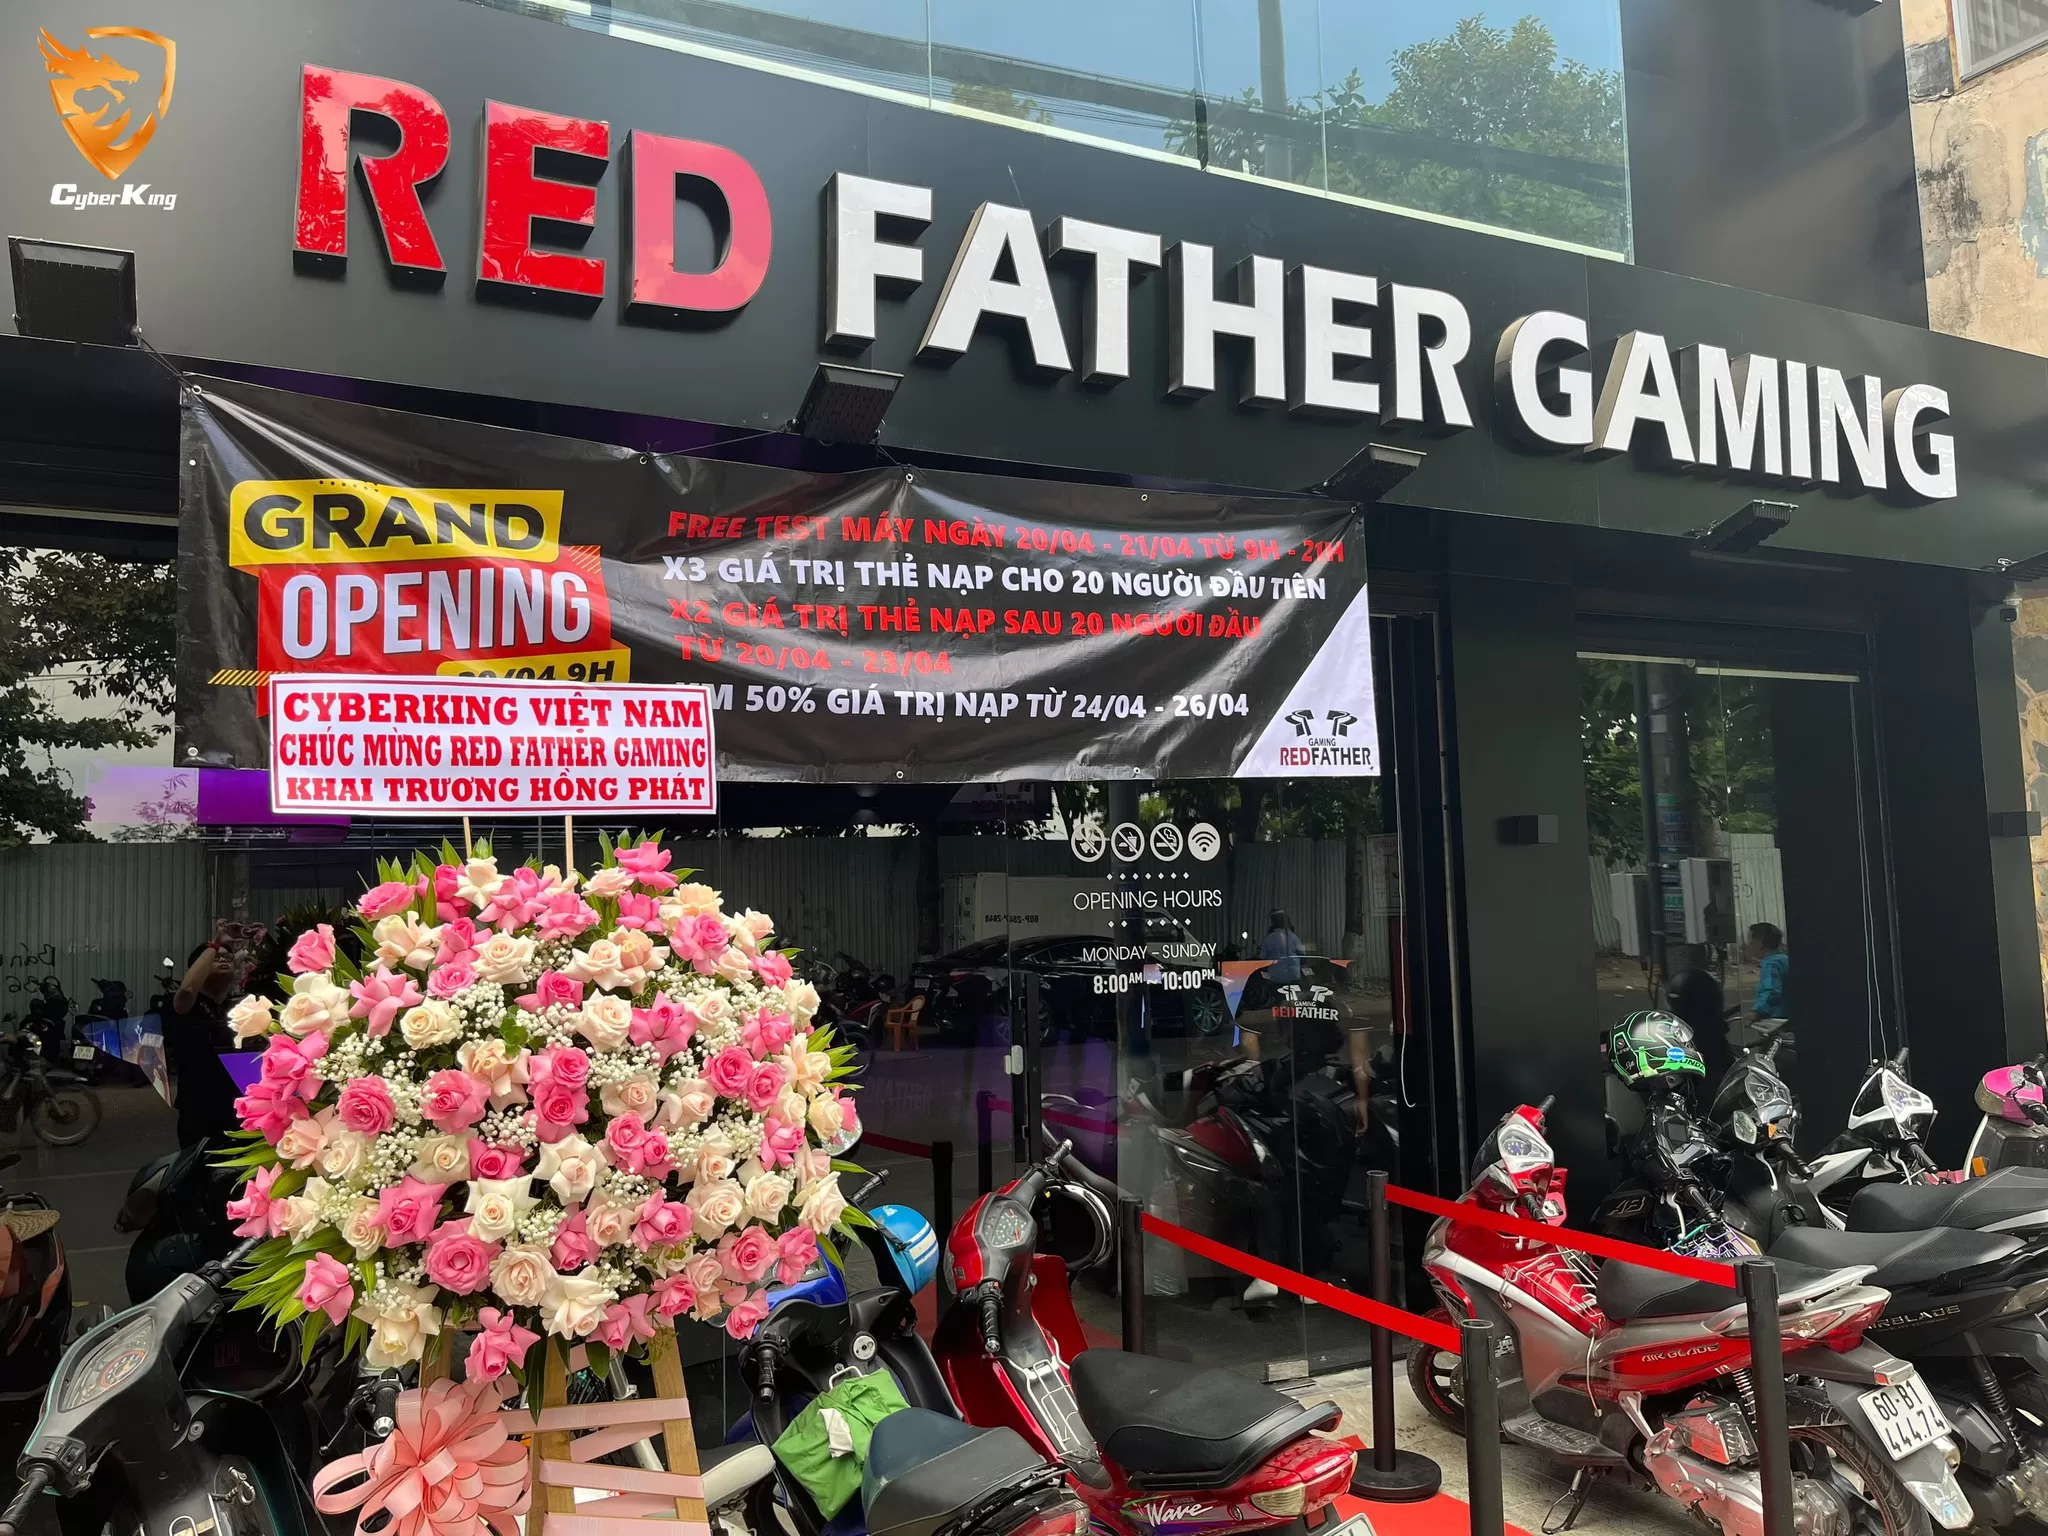 Red Father Gaming